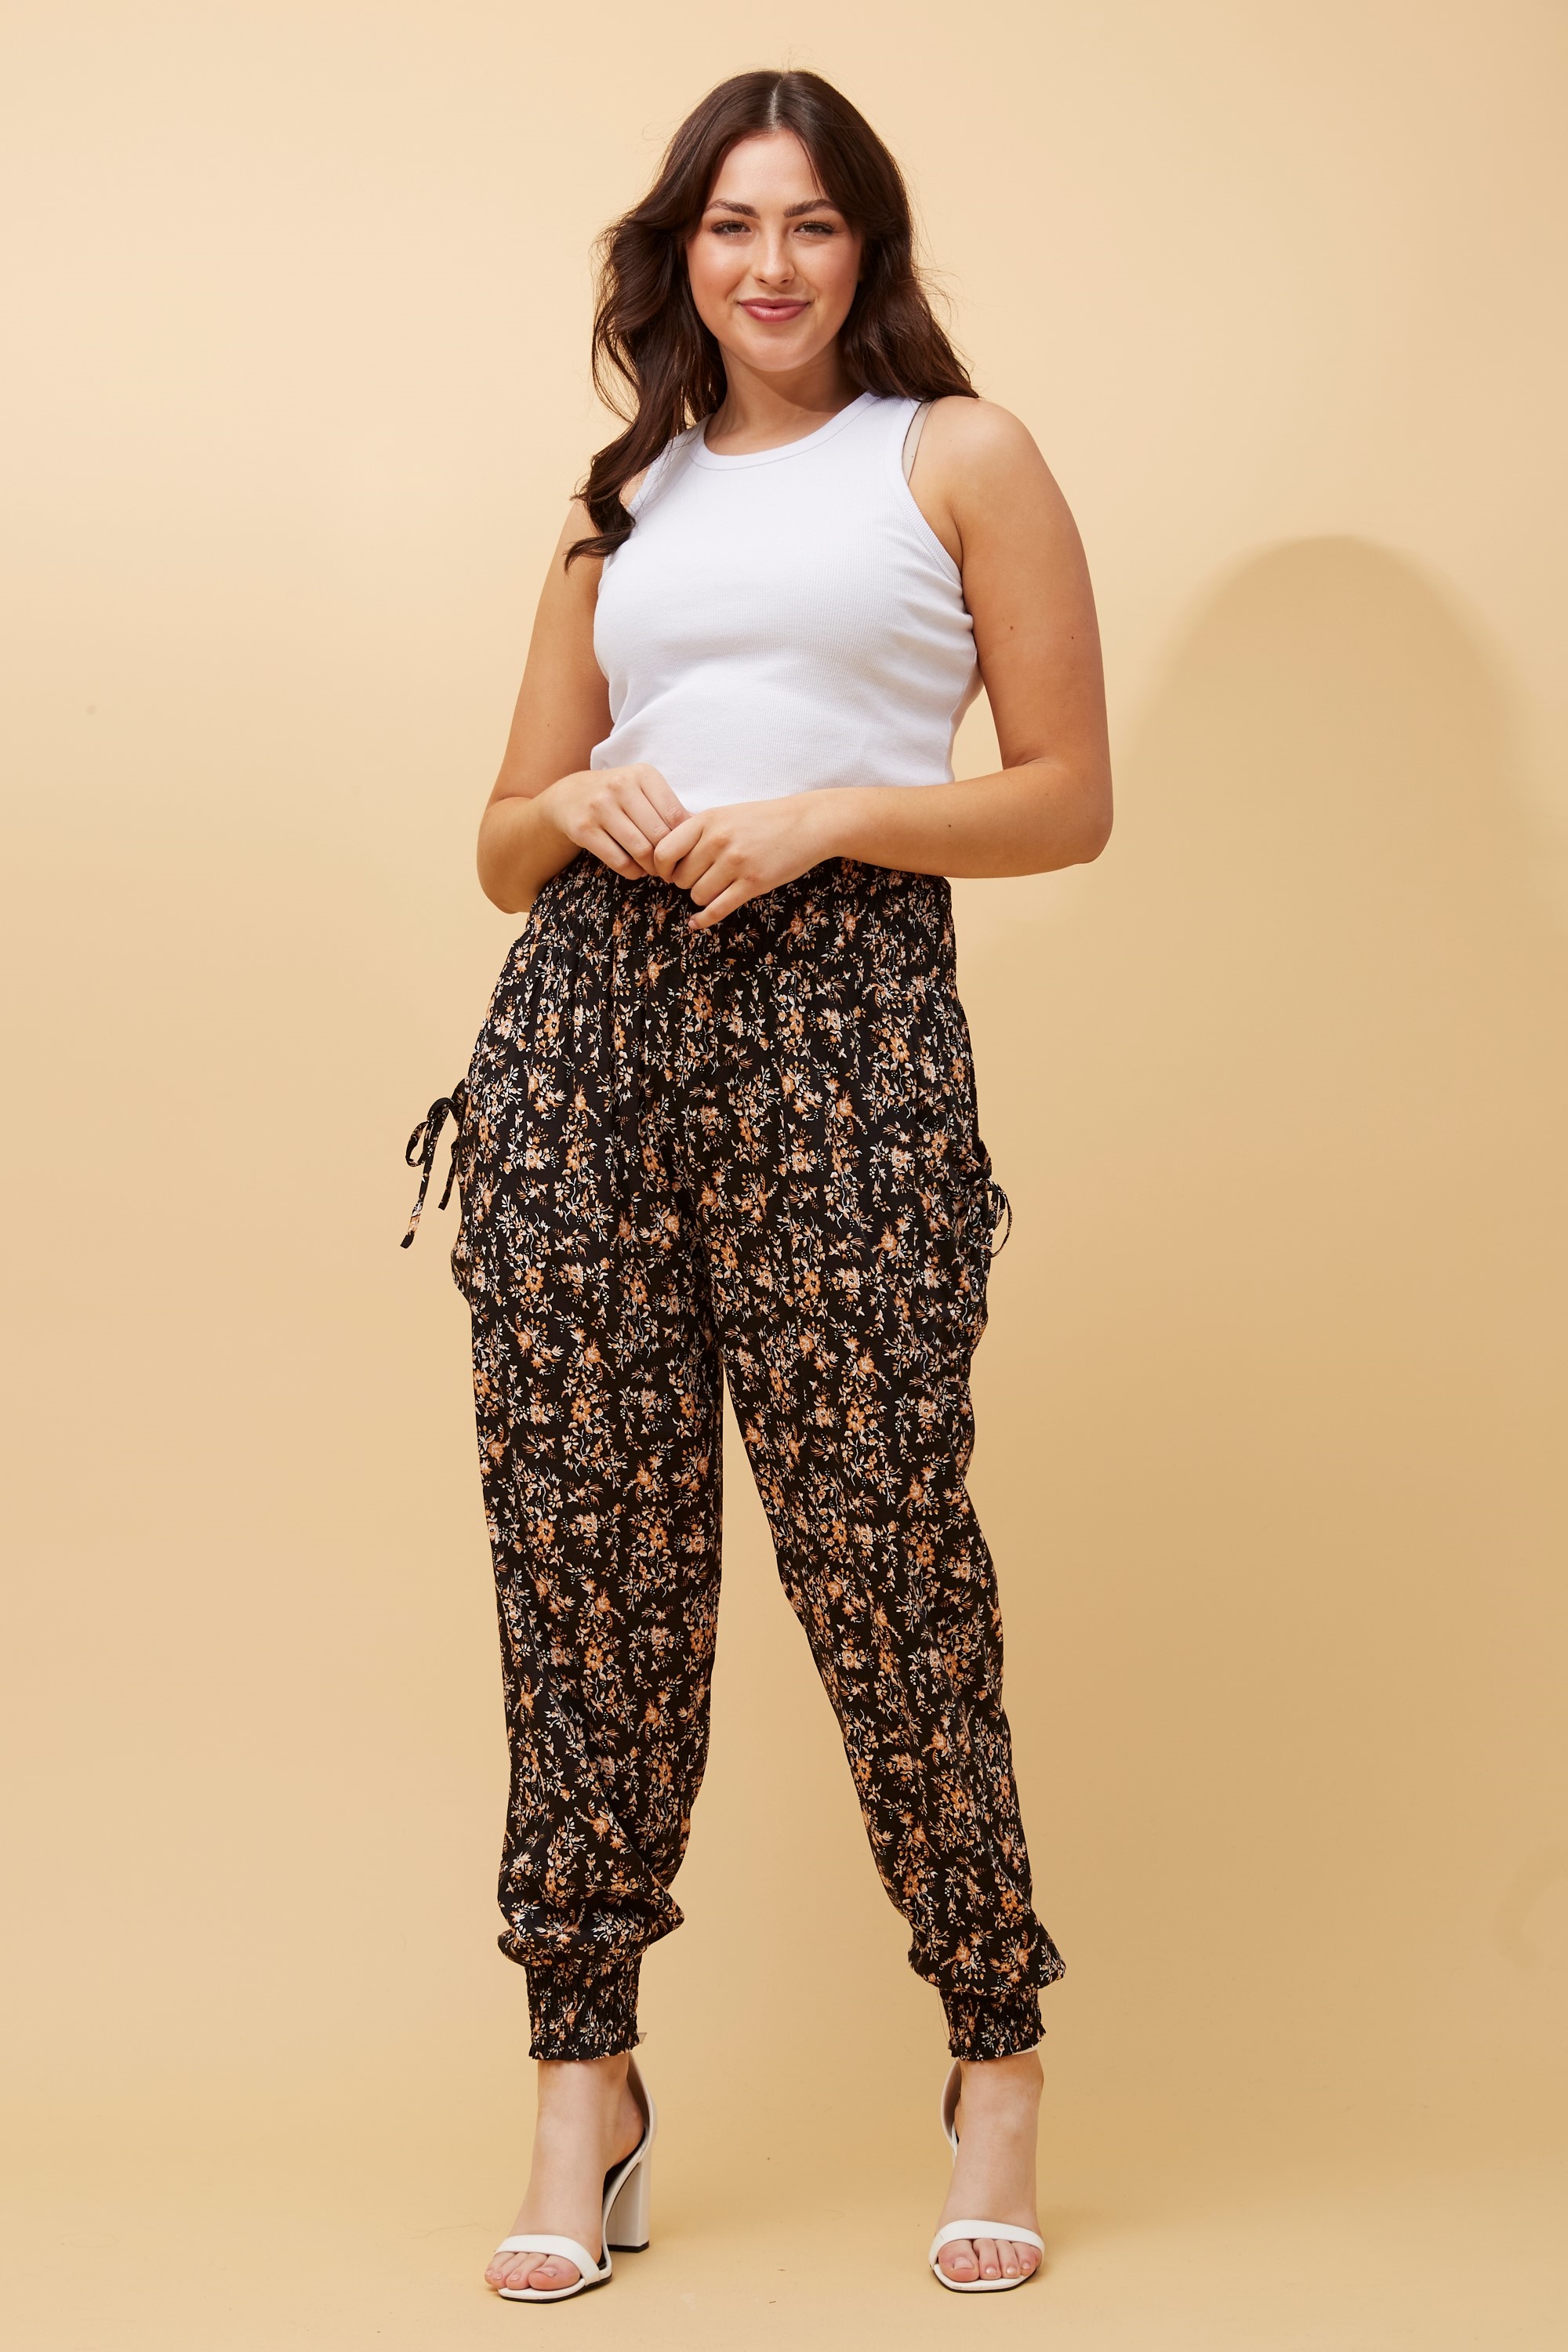 2019 Fashion Trends in Harem Pants – Clothes By Locker Room